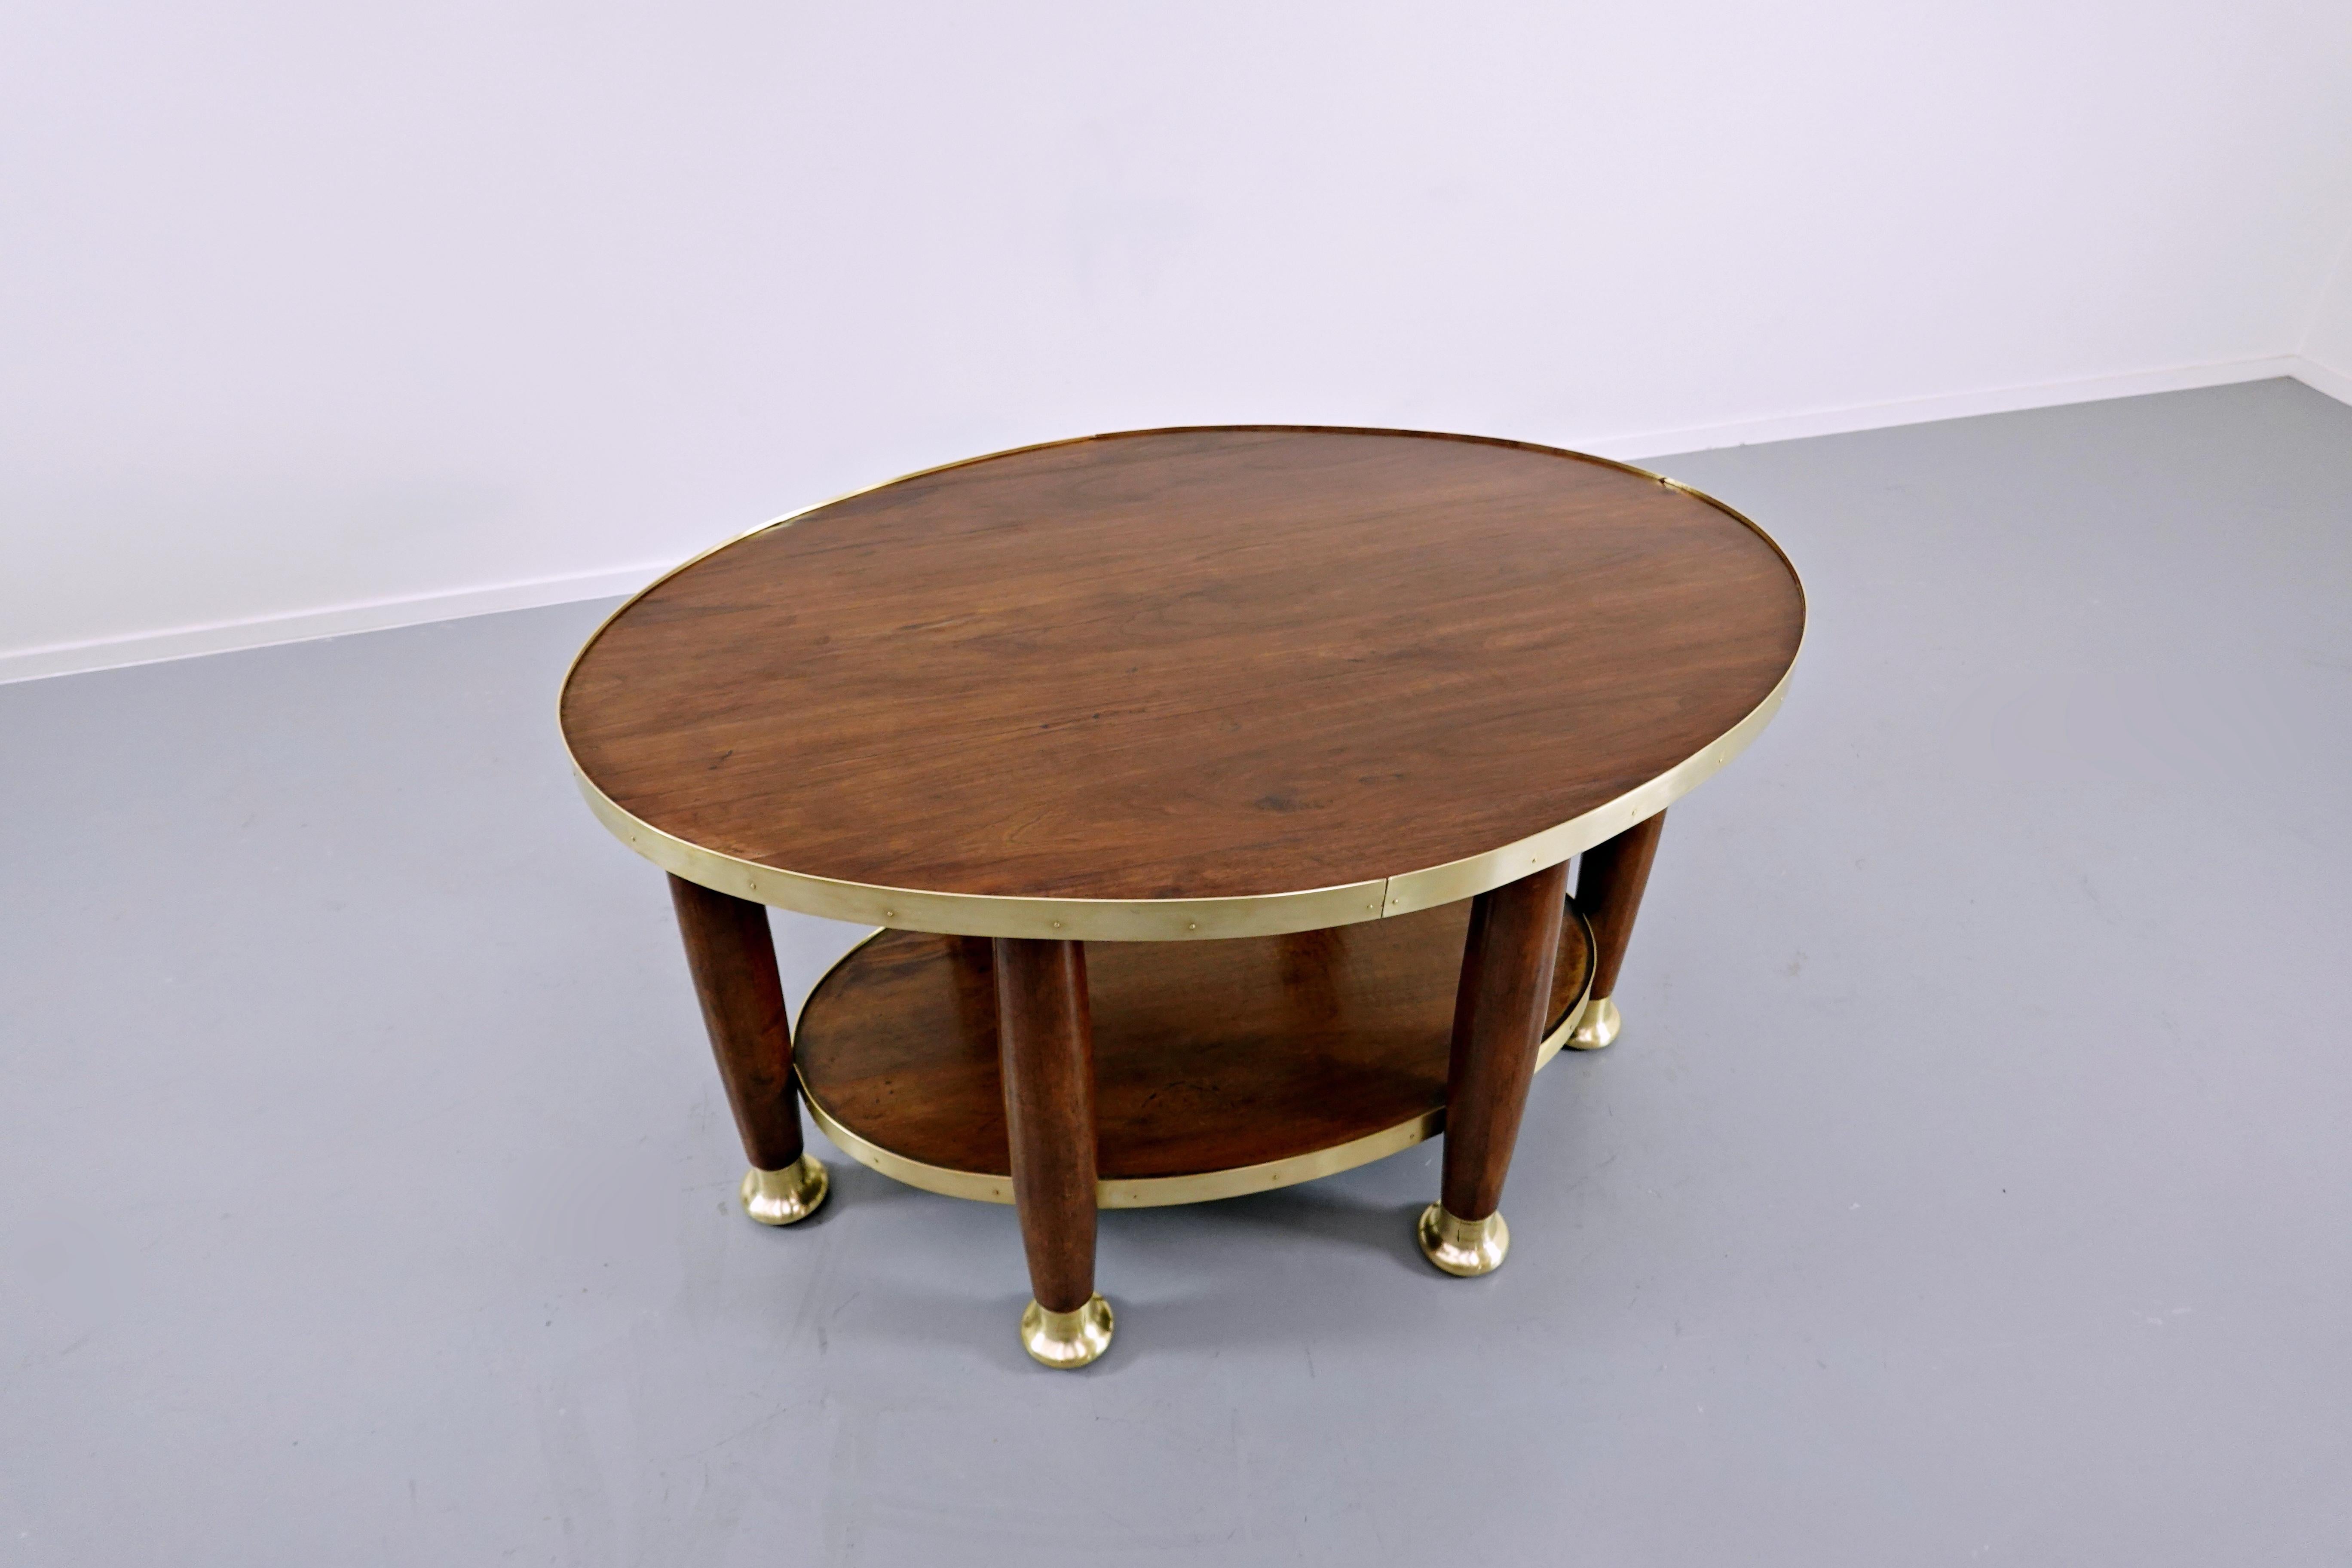 Art Nouveau Table in the Style of Adolf Loos, Wood and Brass, circa 1910 For Sale 5